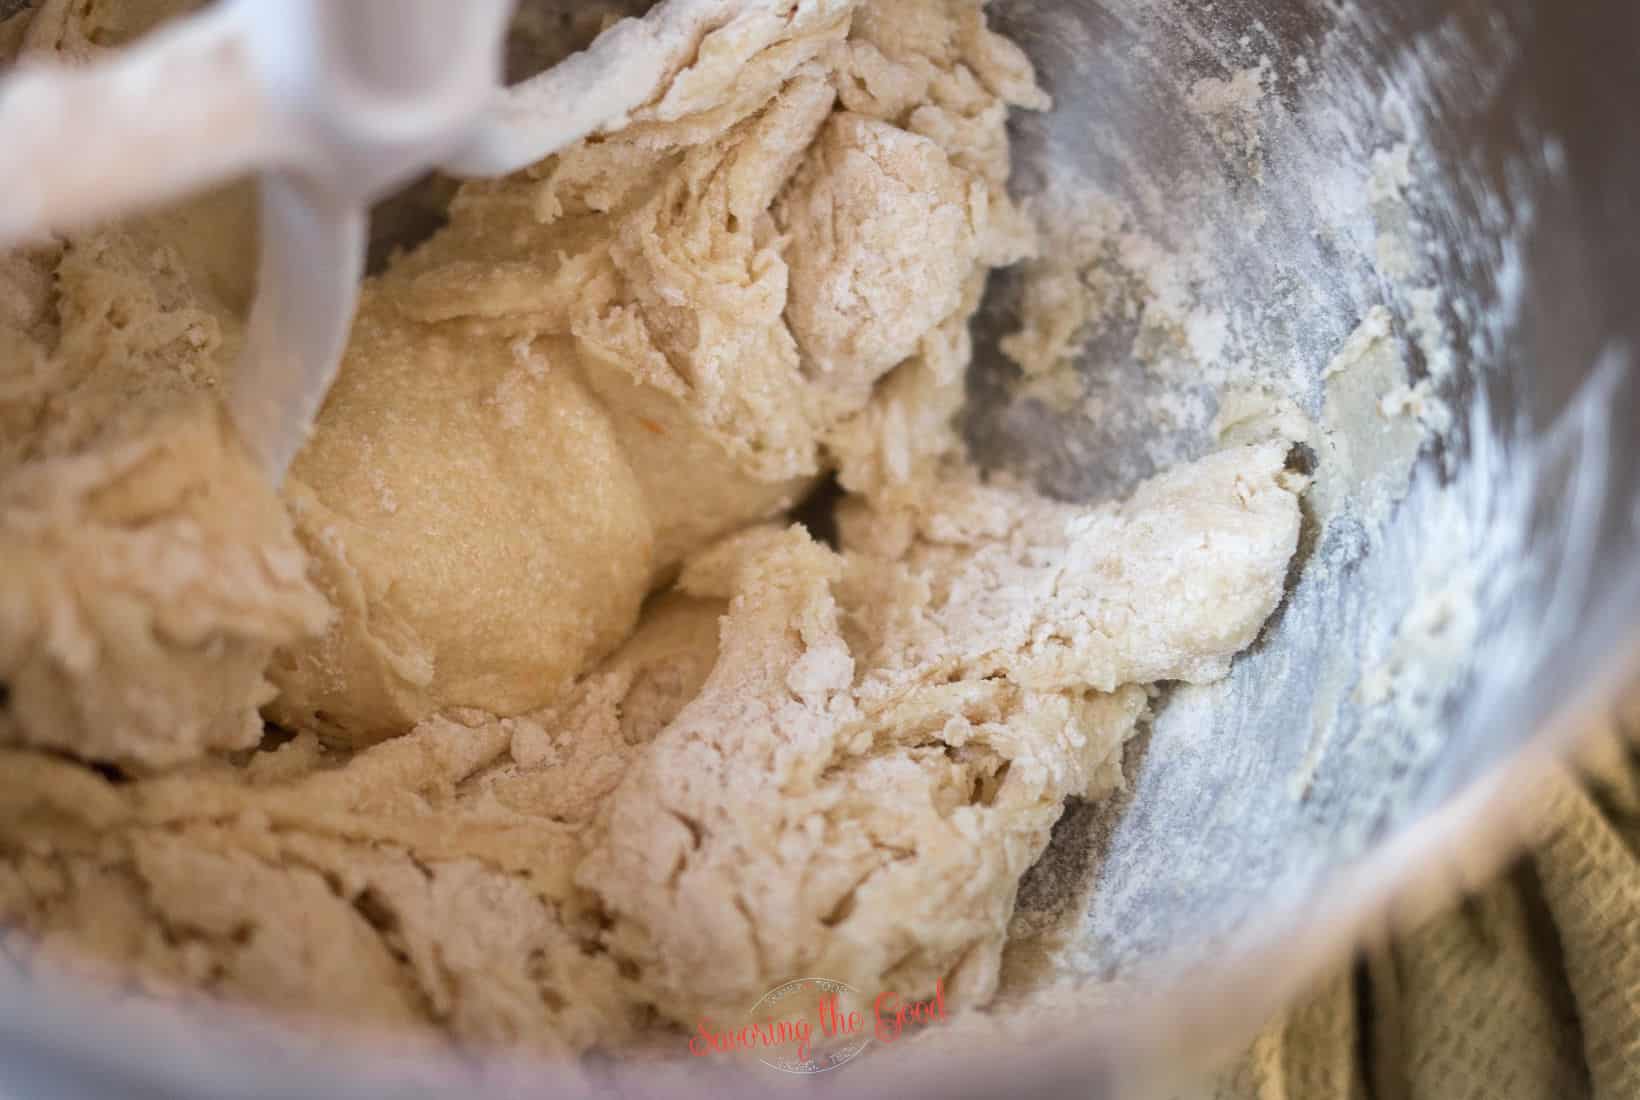 flour fully incorporated into the batter.